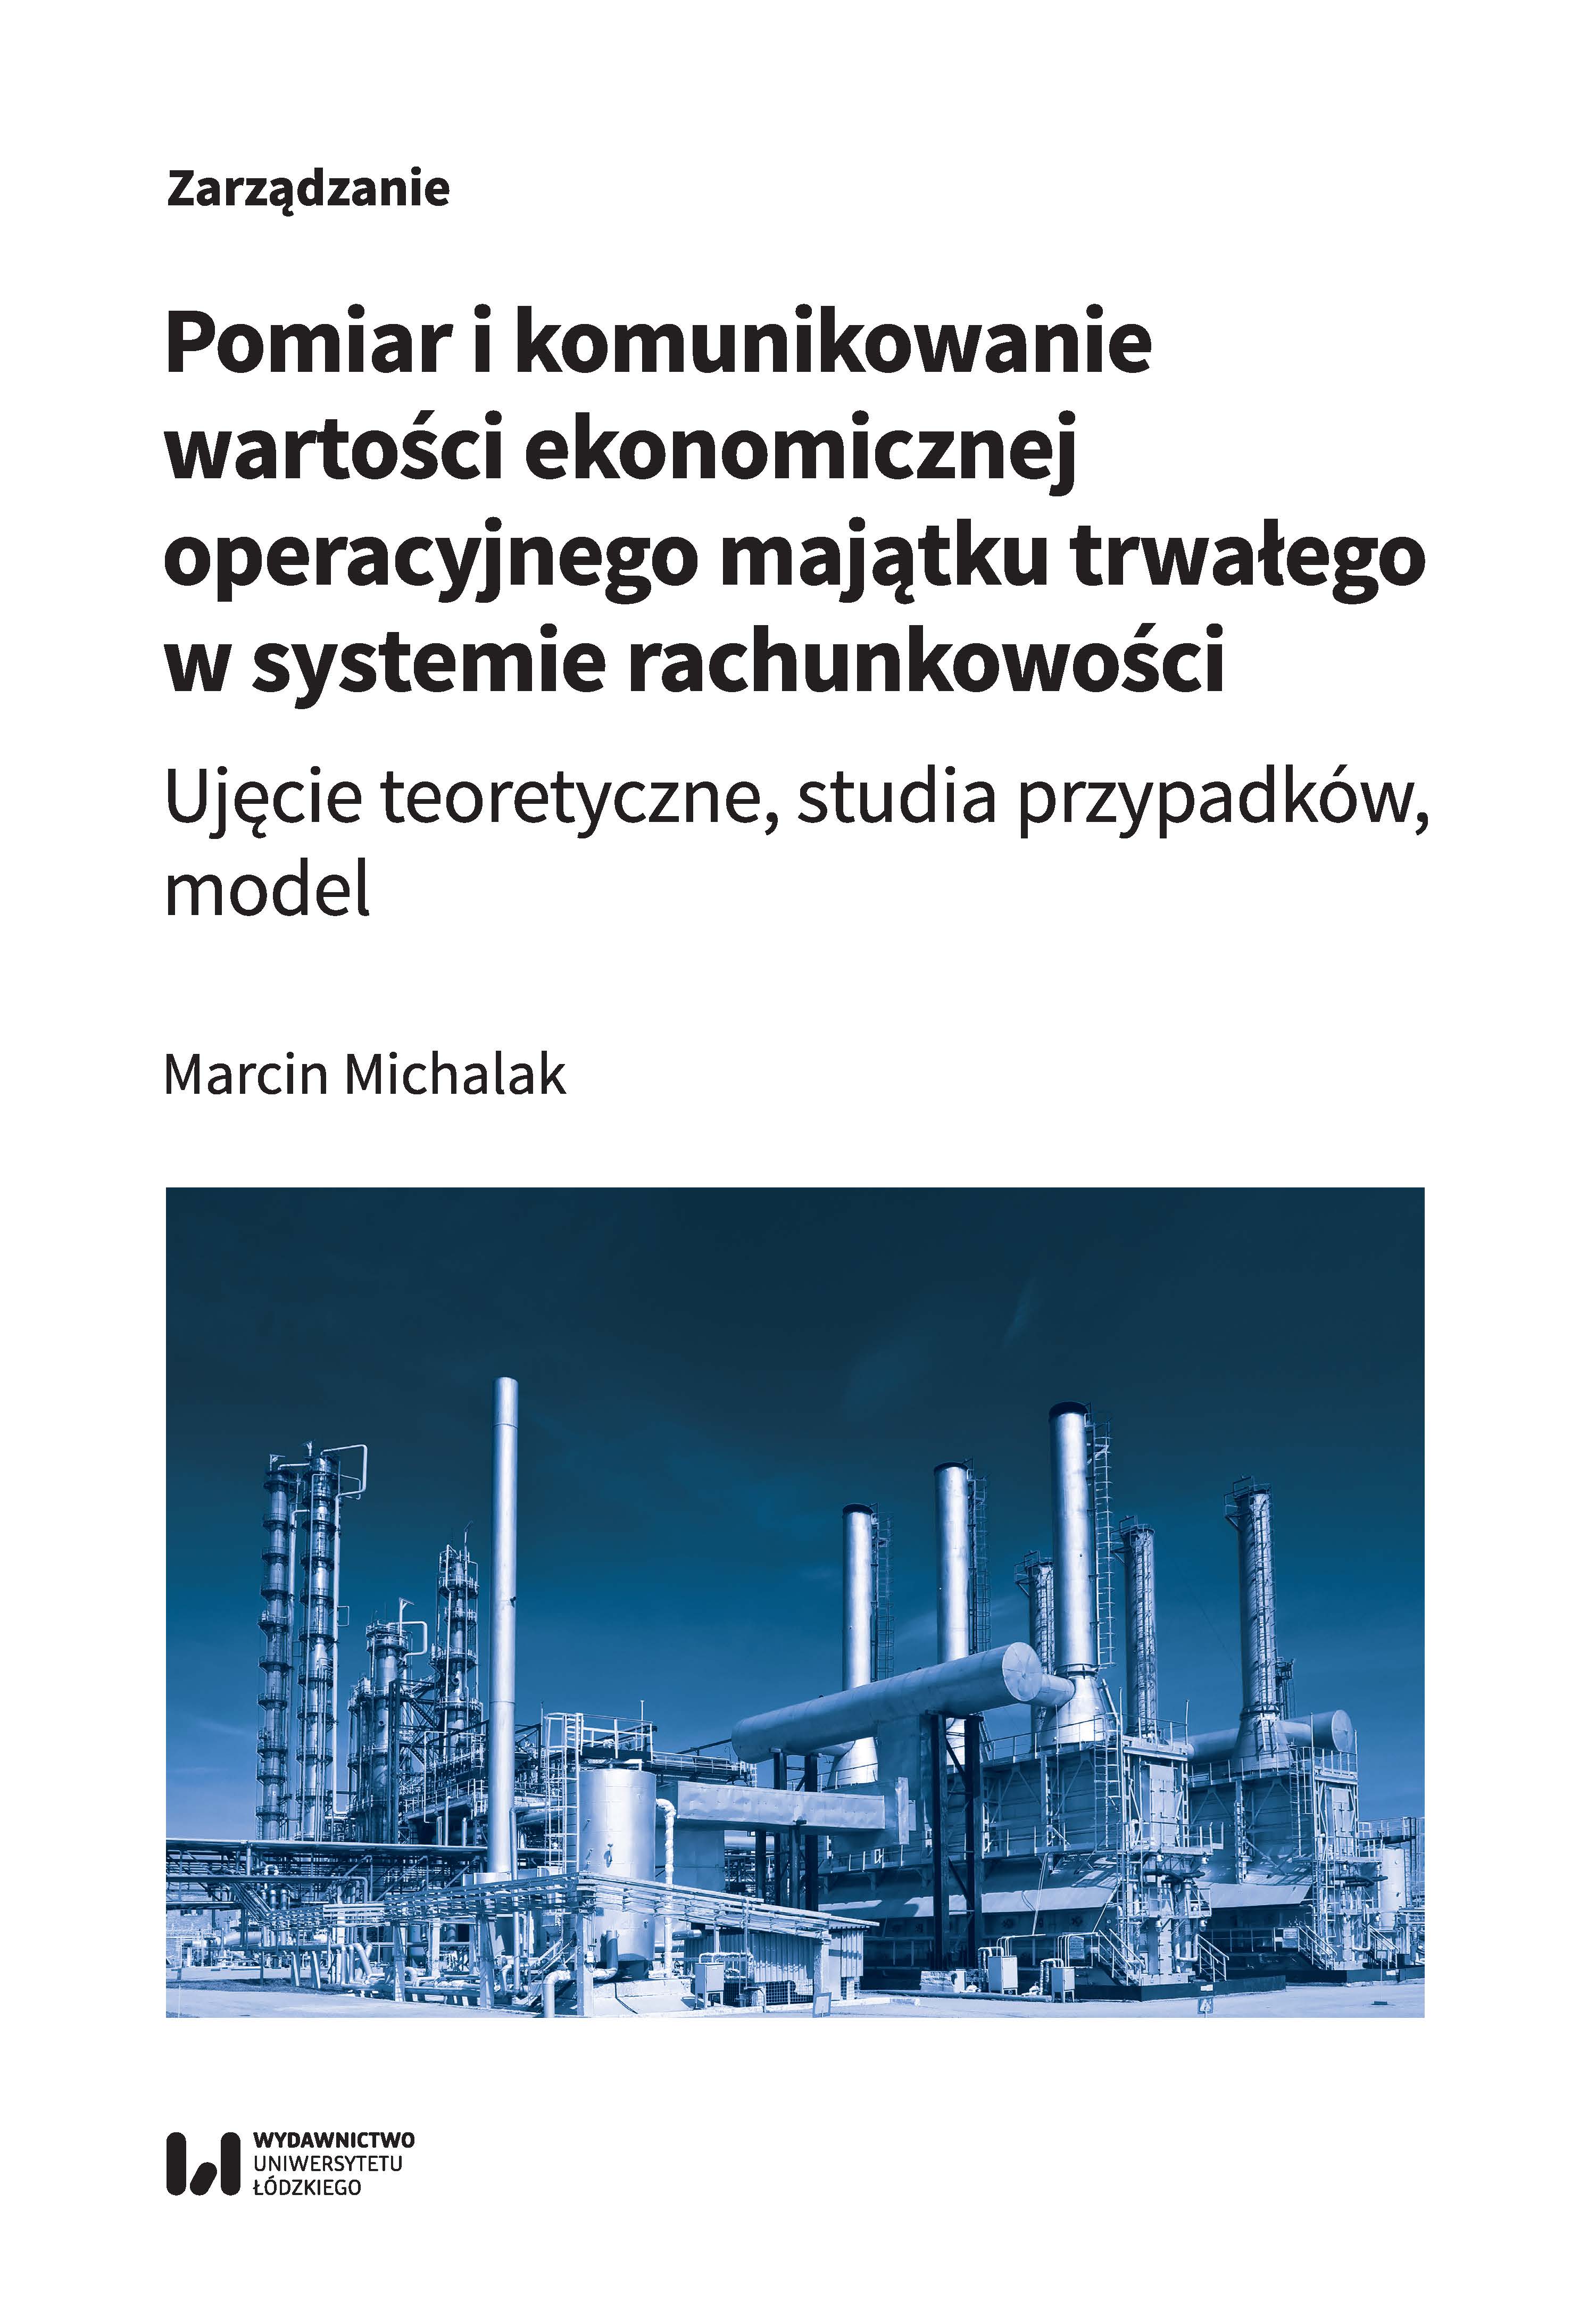 Measurement and communication of the operational fixed assets economic value in the accounting system - theoretical approach, case studies, model